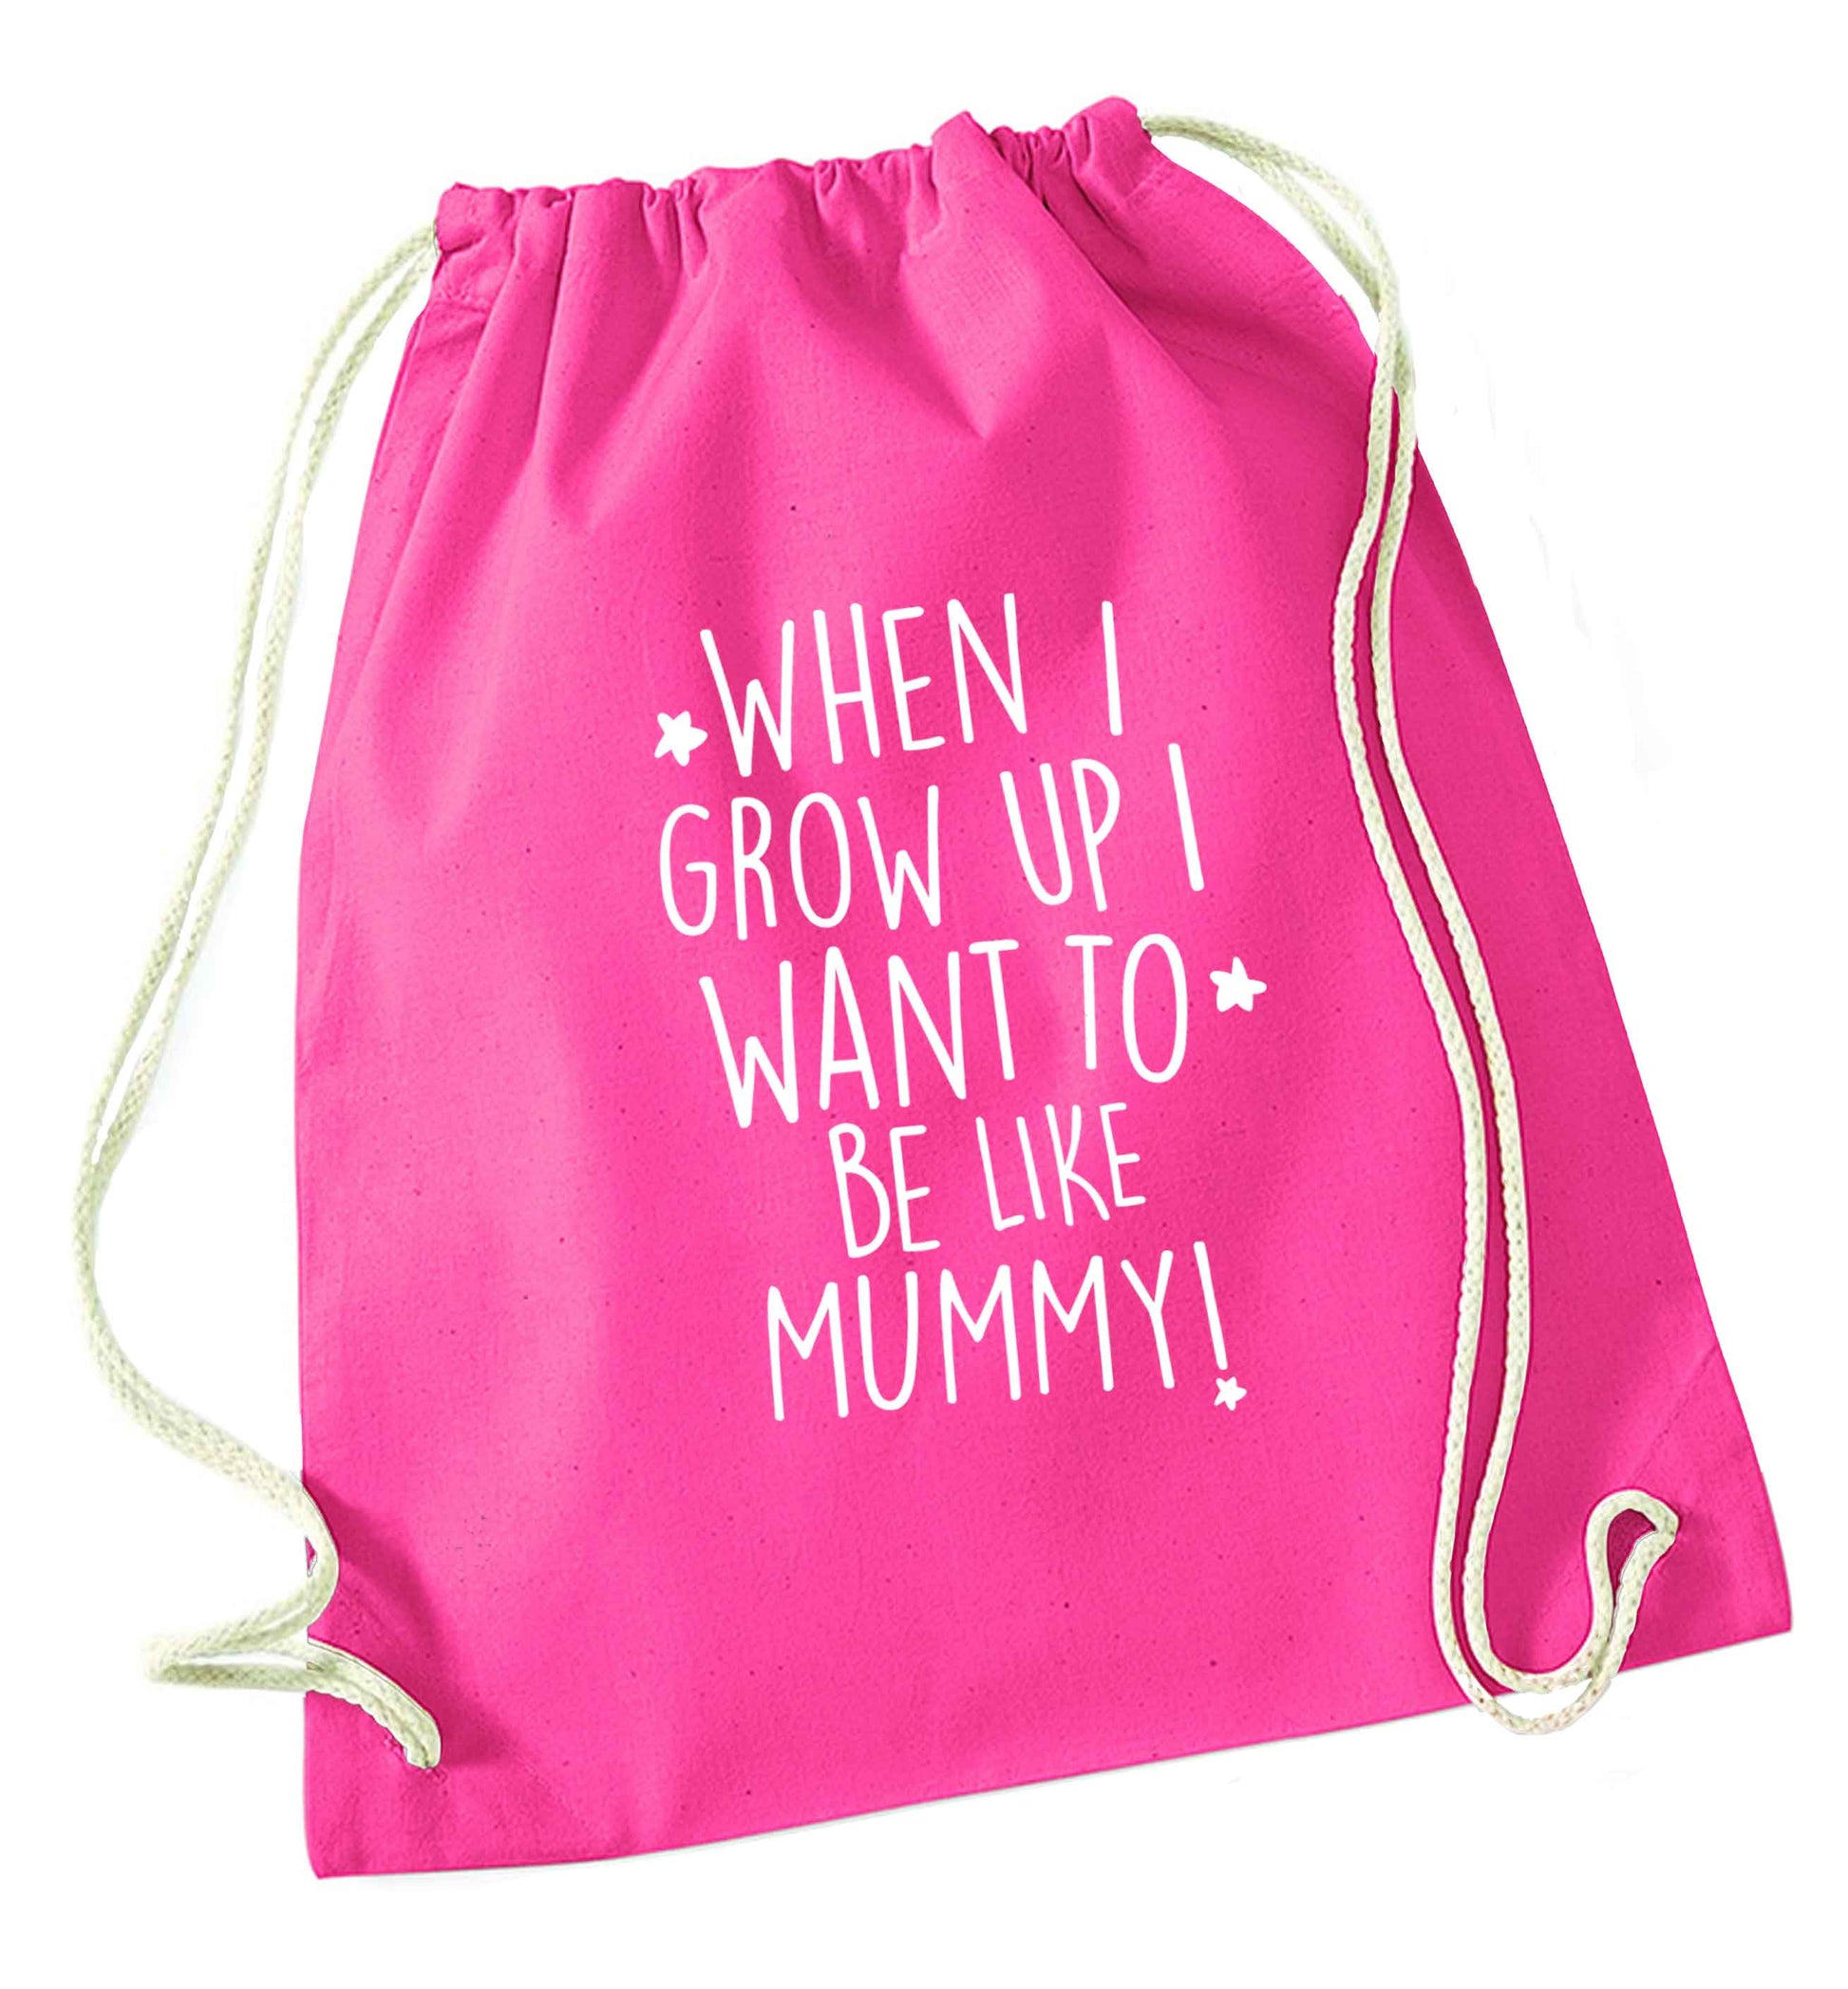 When I grow up I want to be like my mummy pink drawstring bag